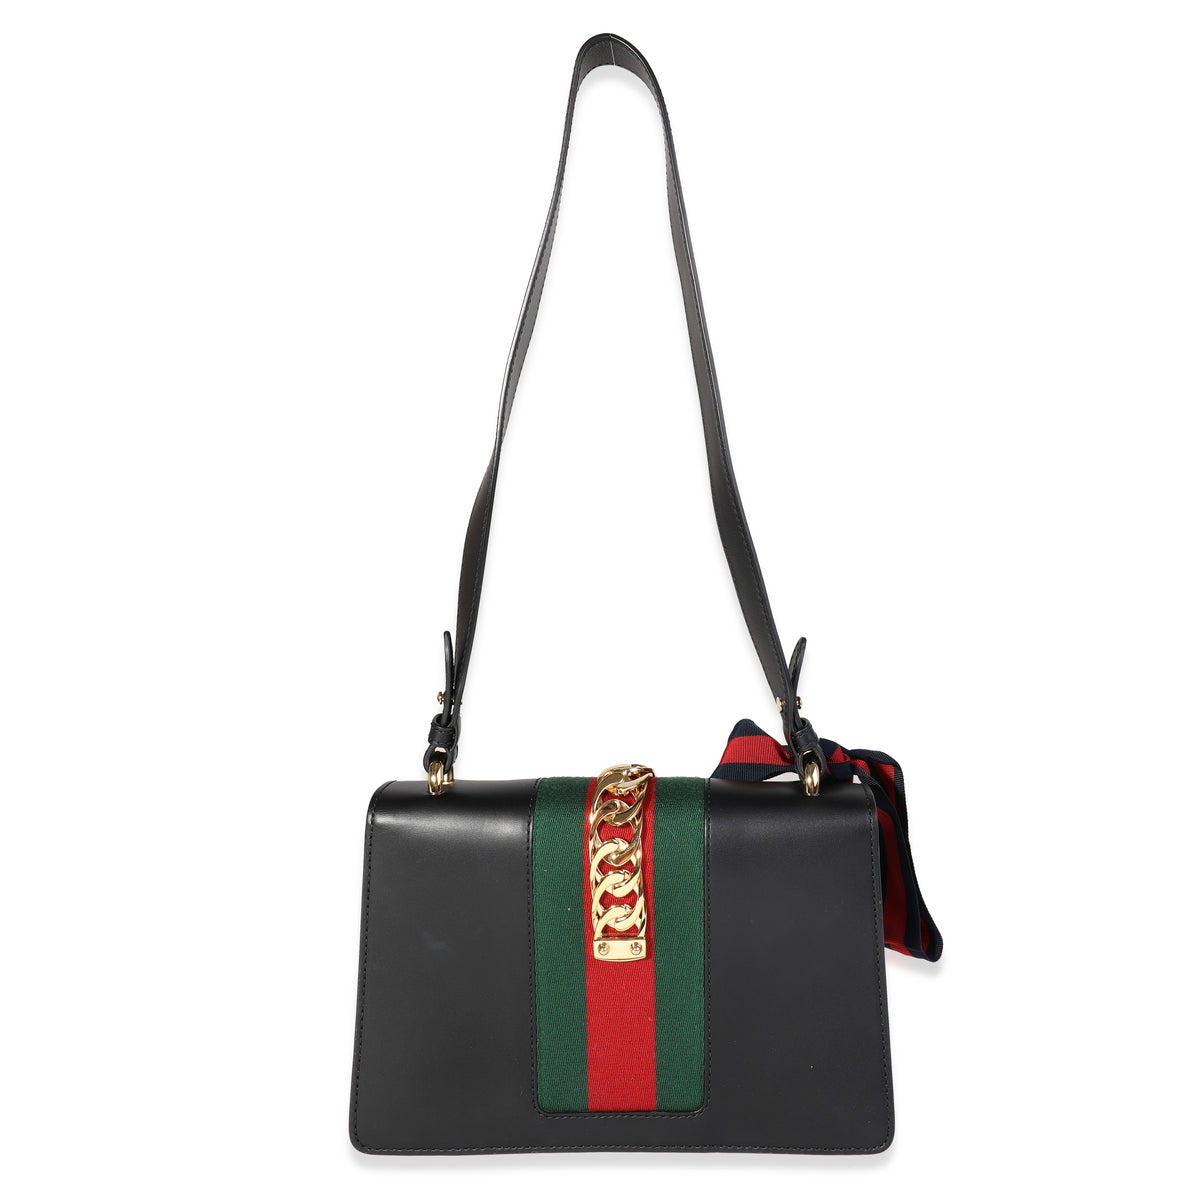 Gucci Black Smooth Leather & Web Small Sylvie Shoulder Bag